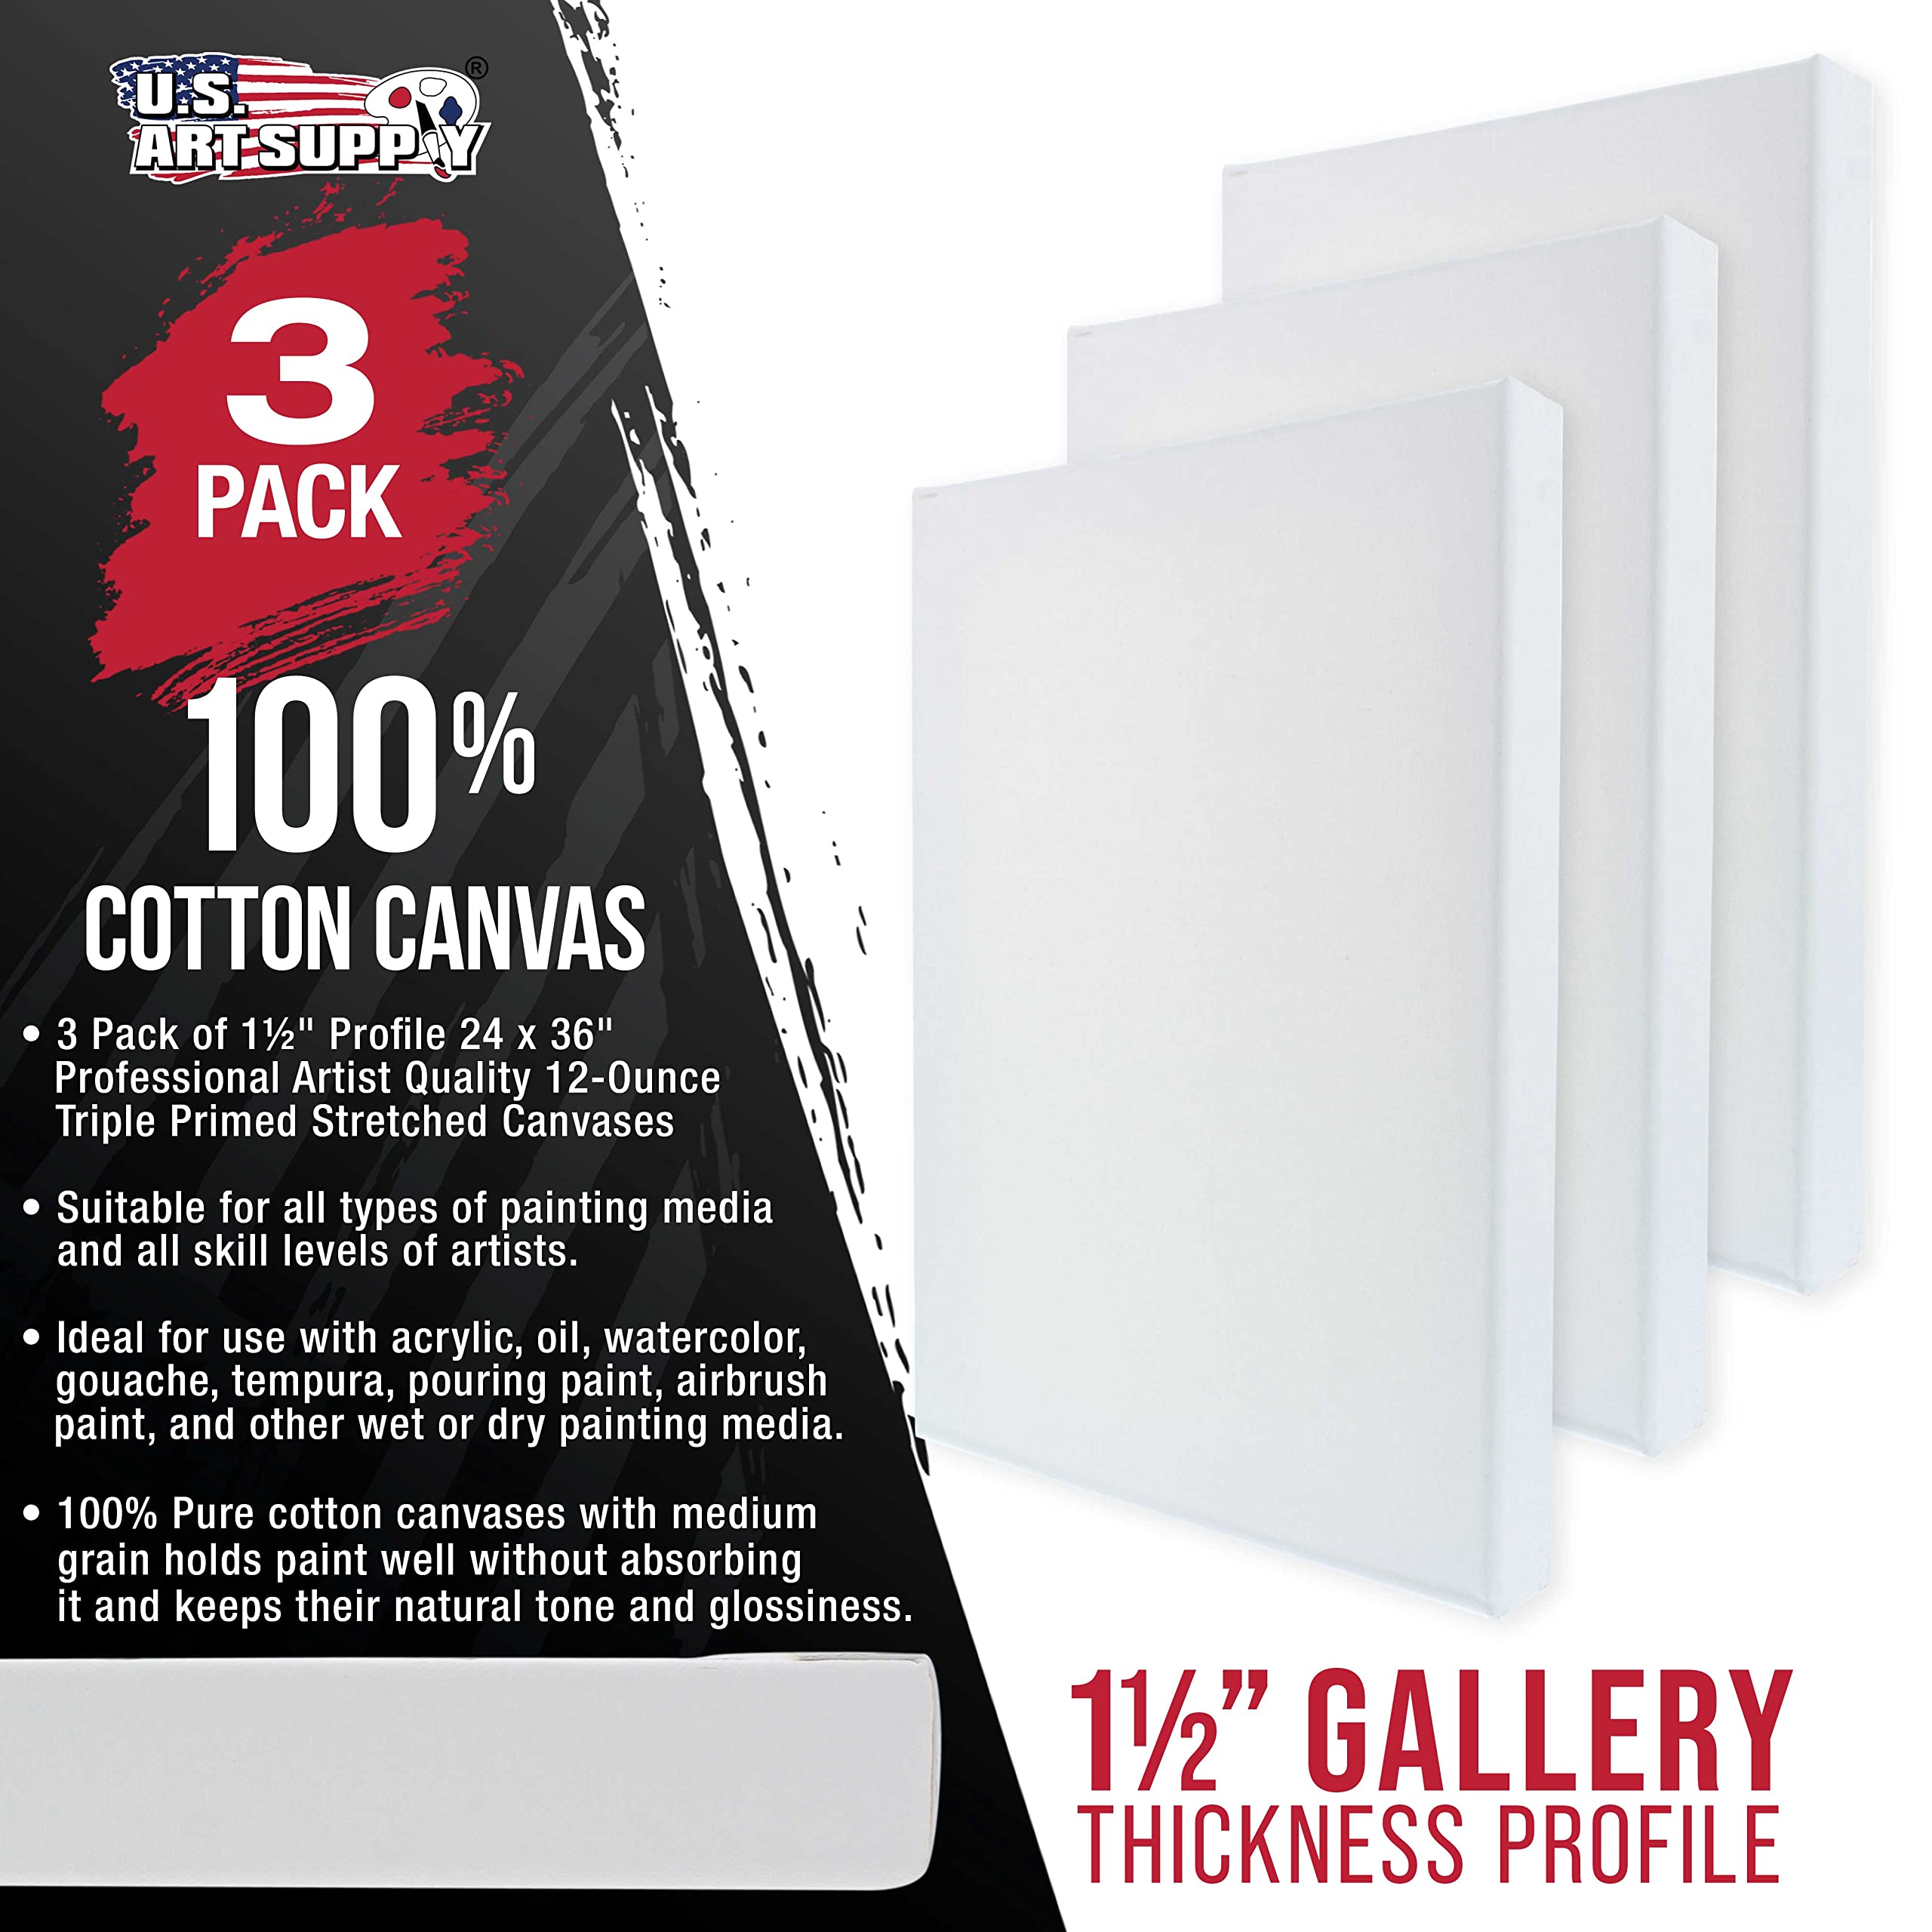 U.S. Art Supply 24 x 36 inch Gallery Depth 1-1/2" Profile Stretched Canvas, 3-Pack - 12-Ounce Acrylic Gesso Triple Primed, Professional Artist Quality, 100% Cotton - Acrylic Pouring, Oil Painting